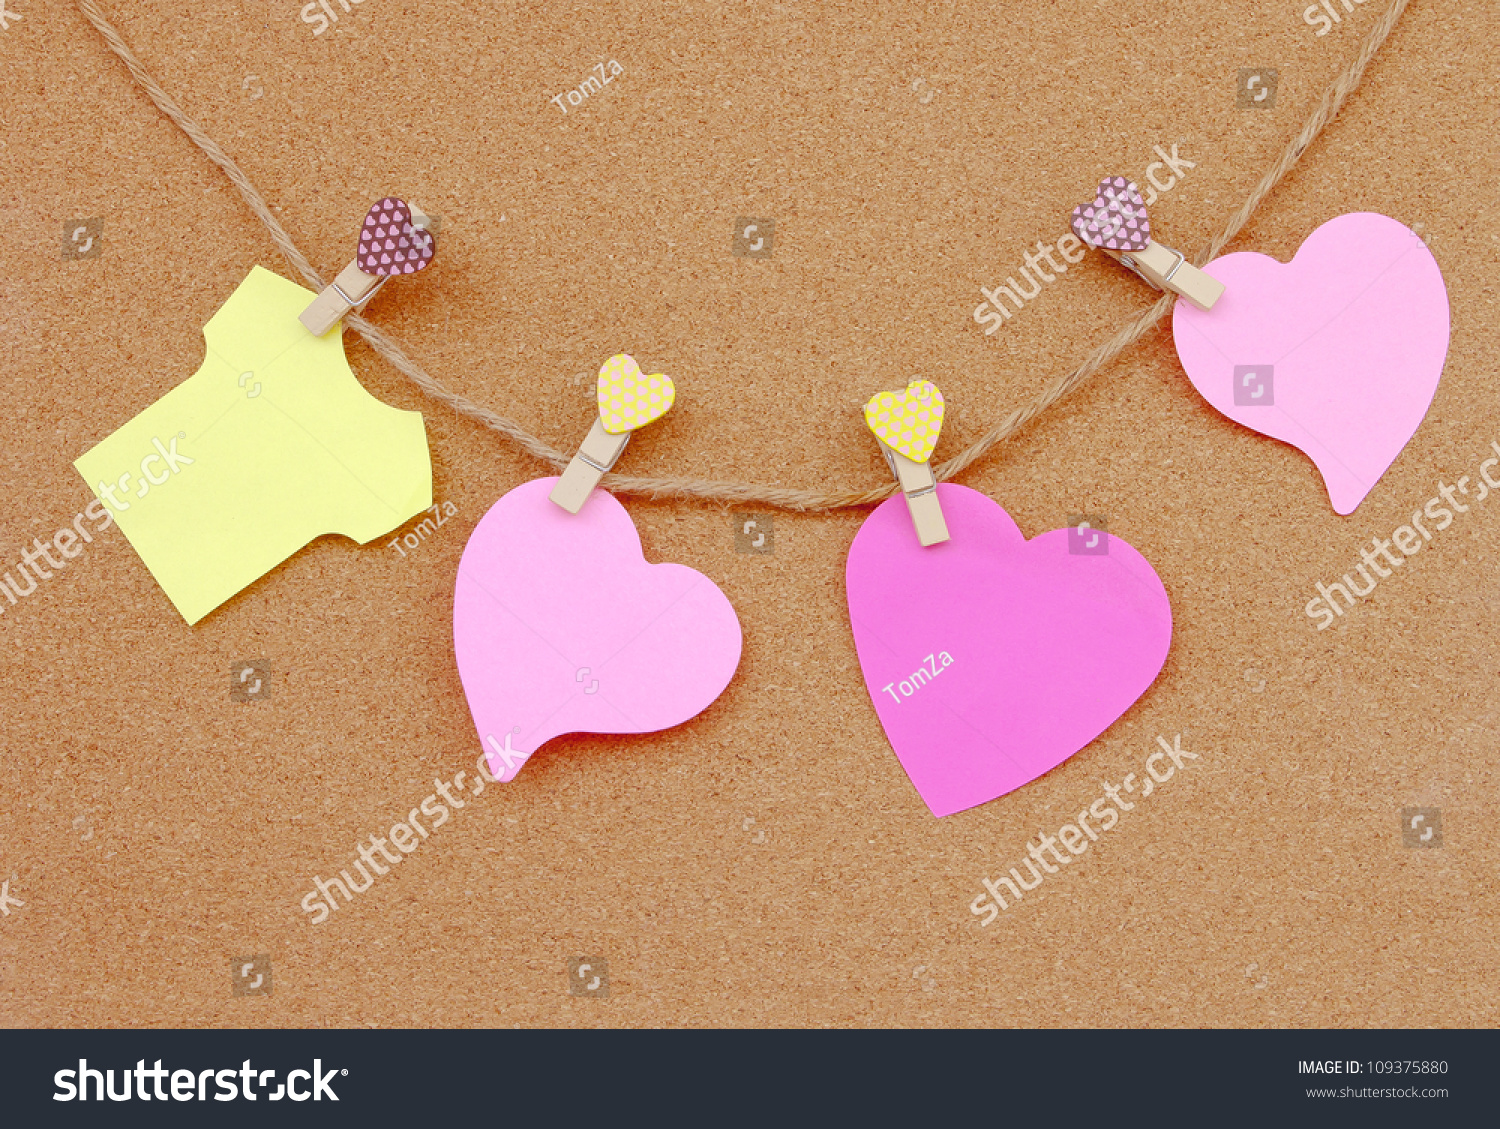 Download Cork Board Pink Yellow Notes Stock Image Download Now PSD Mockup Templates